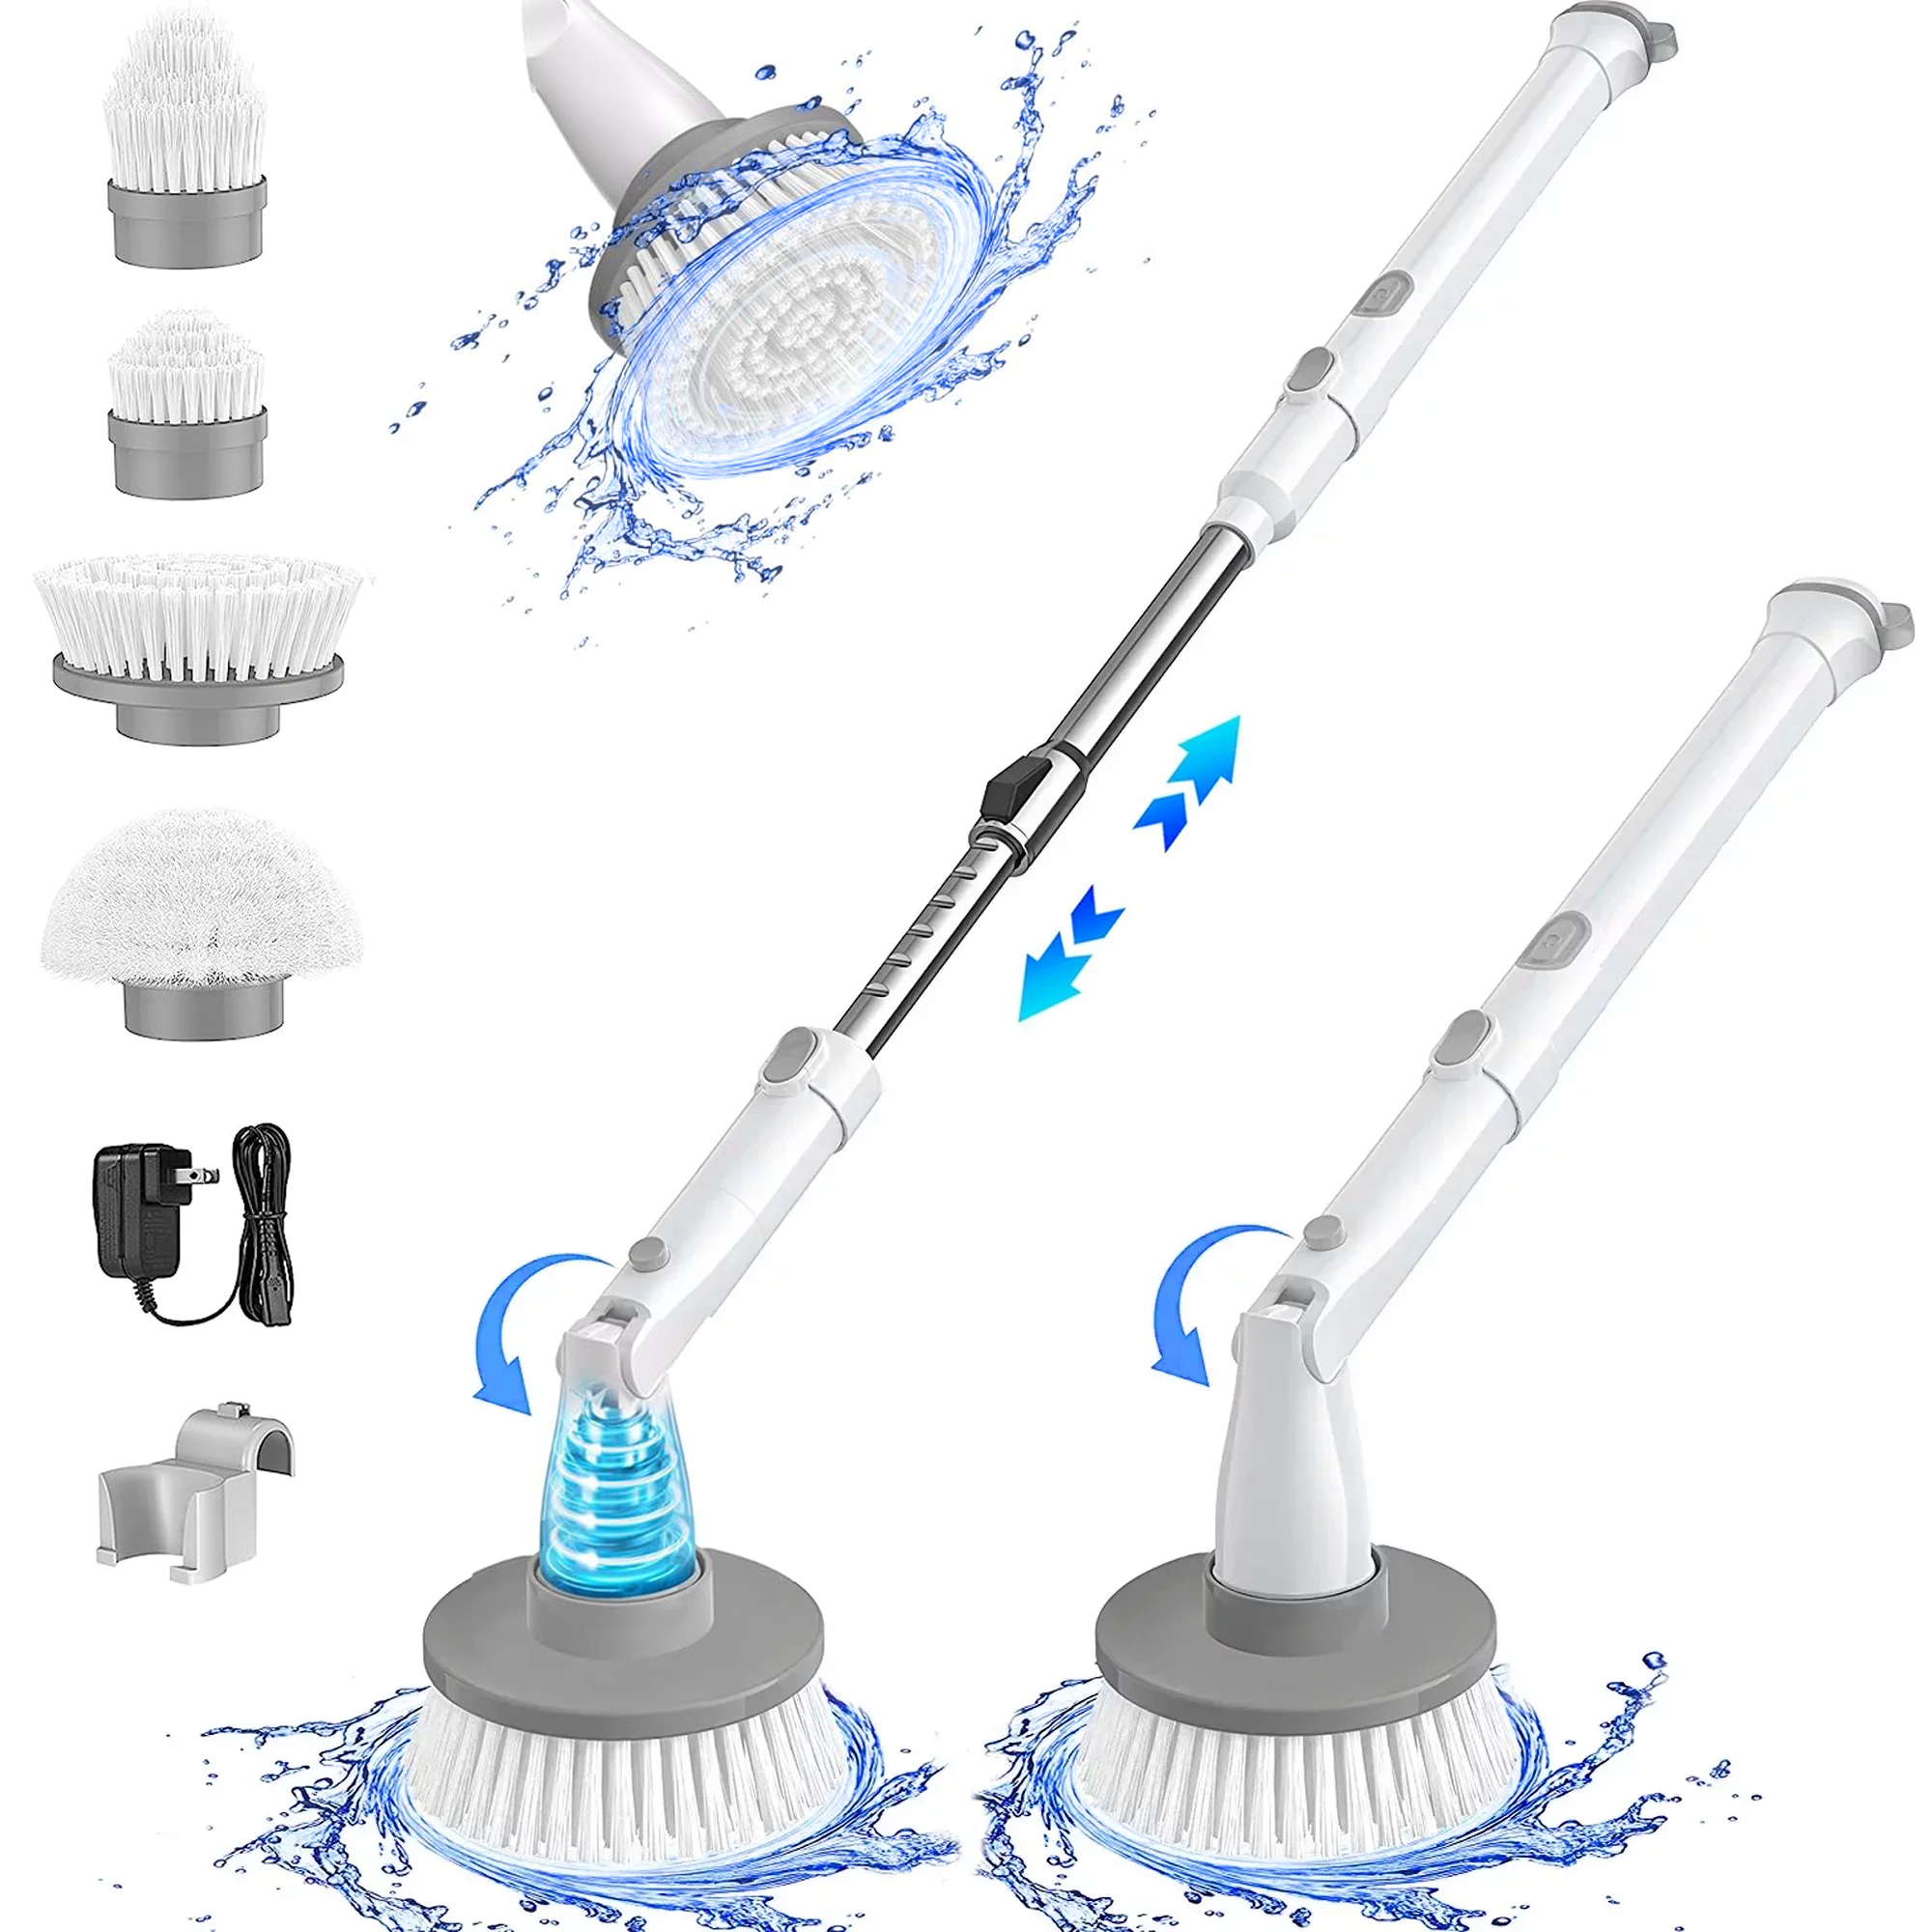 Homitt Electric Spin Scrubber, 1.5H Power Cleaning Brush 2 Speed Extendable for Shower Bathroom Bathtub Tile Sink Corners, Stainless Steel+Superior ABS, Durable Stiff Bristles - image 1 of 18